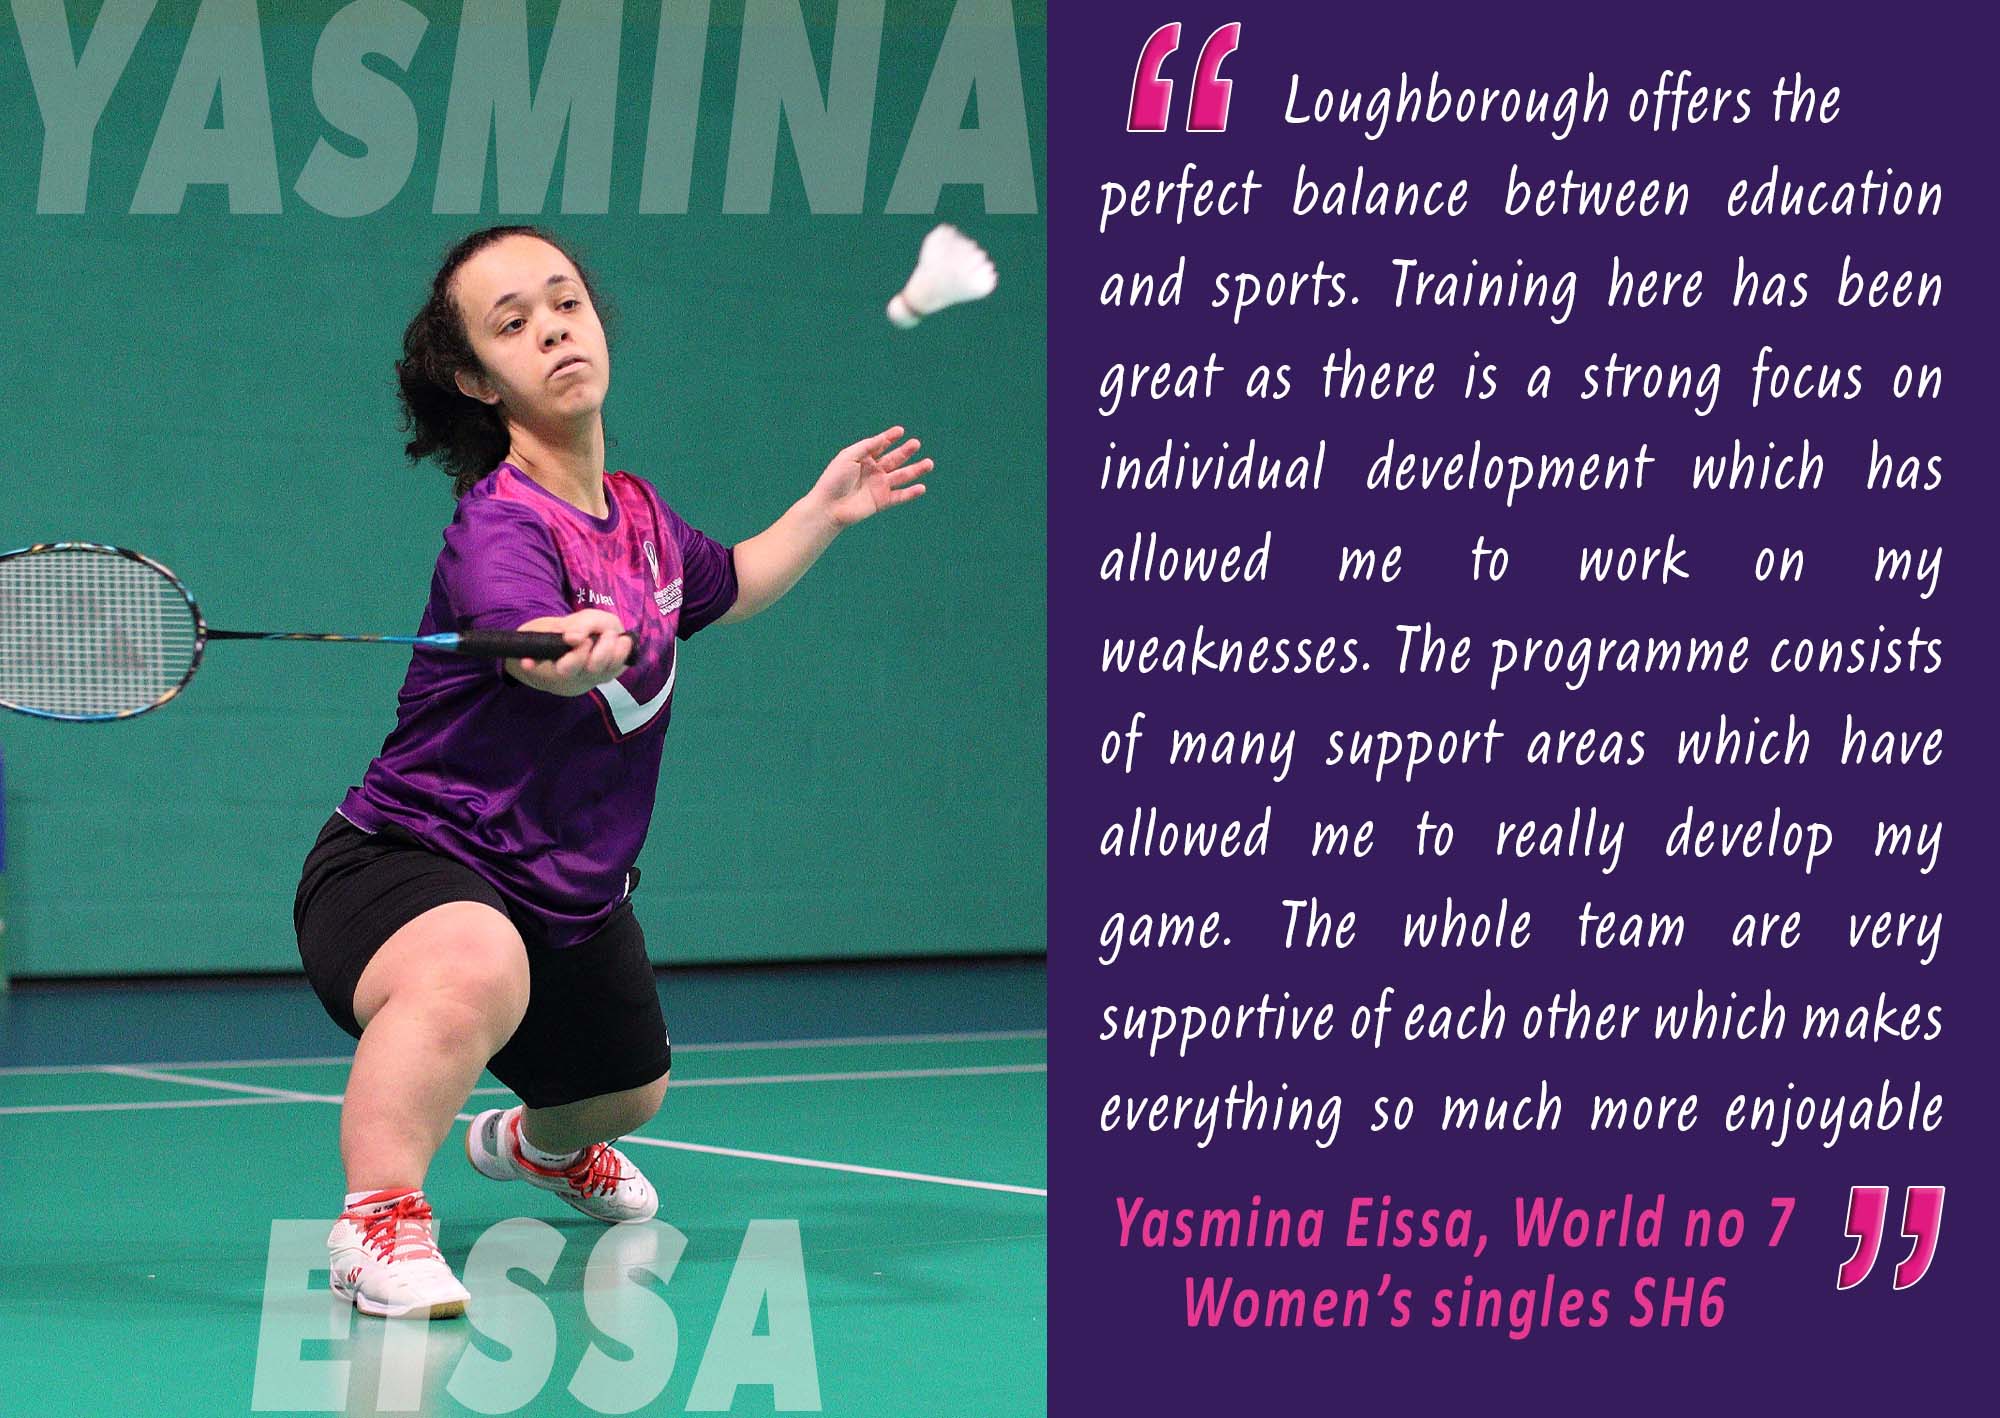 “Loughborough offers the perfect balance between education and sports. Training here has been great as there is a strong focus on individual development which has allowed me to work on my weaknesses...The whole team are very supportive of each other which makes everything so much more enjoyable” Yasmina Eissa, World No 7 Women’s singles SH6.